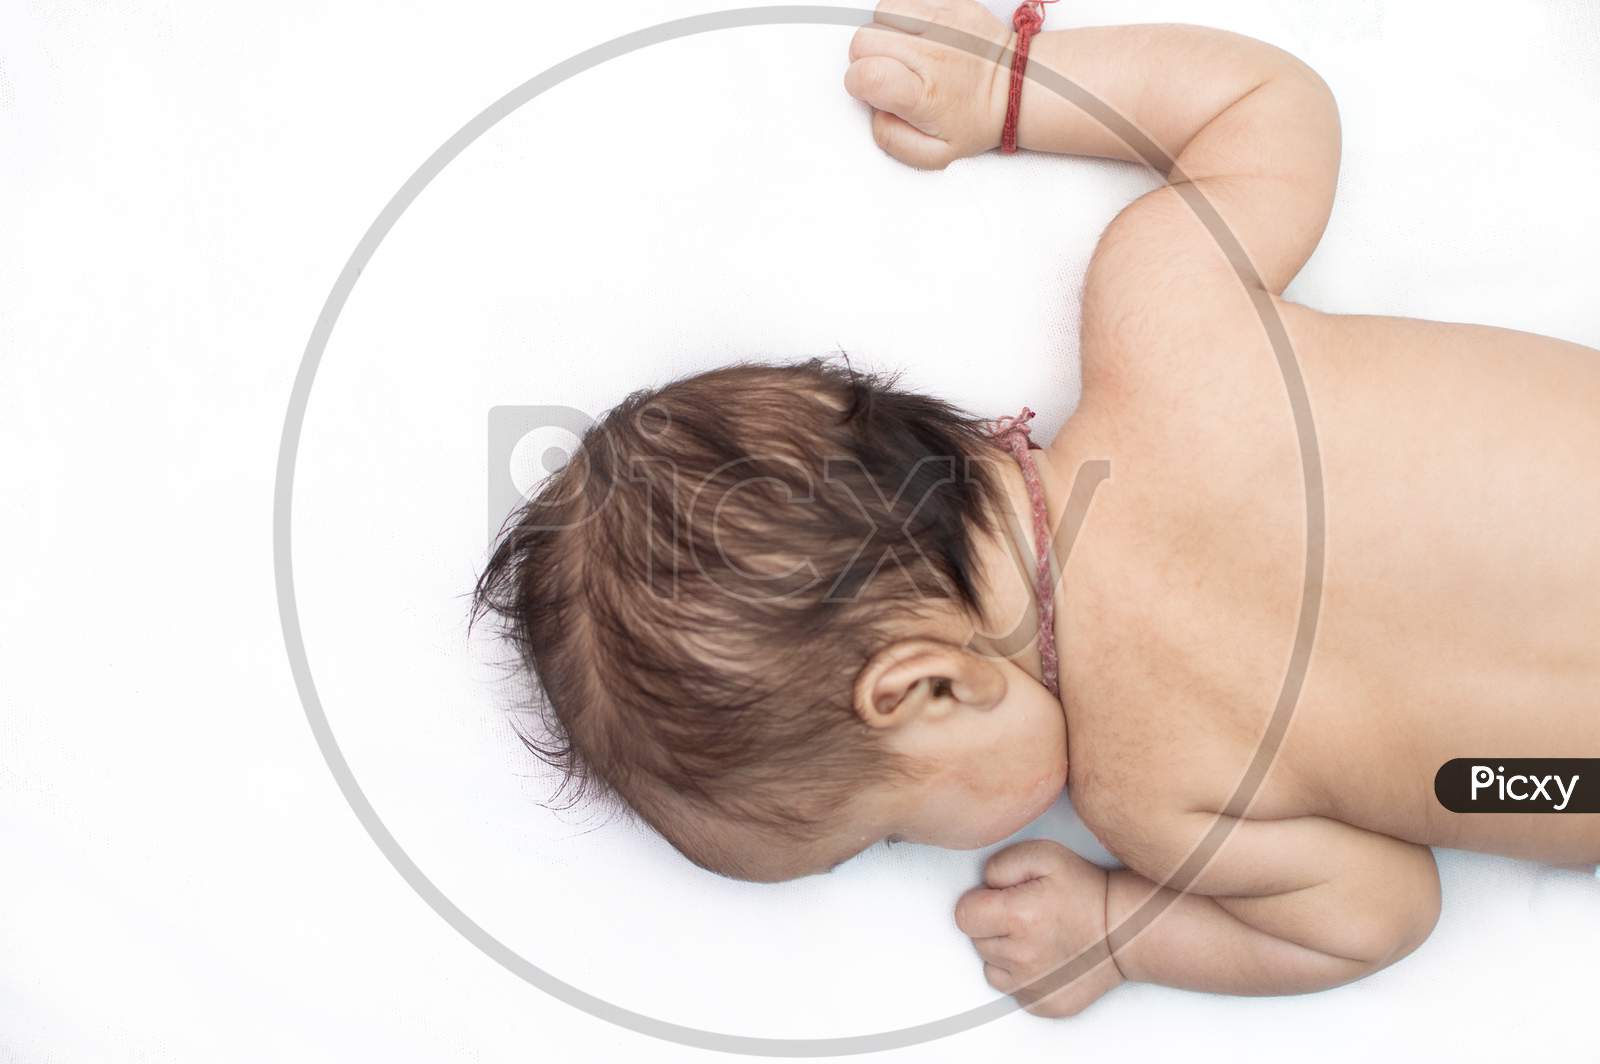 Small Baby Lying On A White Bed Sheet On His Chest Facing Left With Open Hands